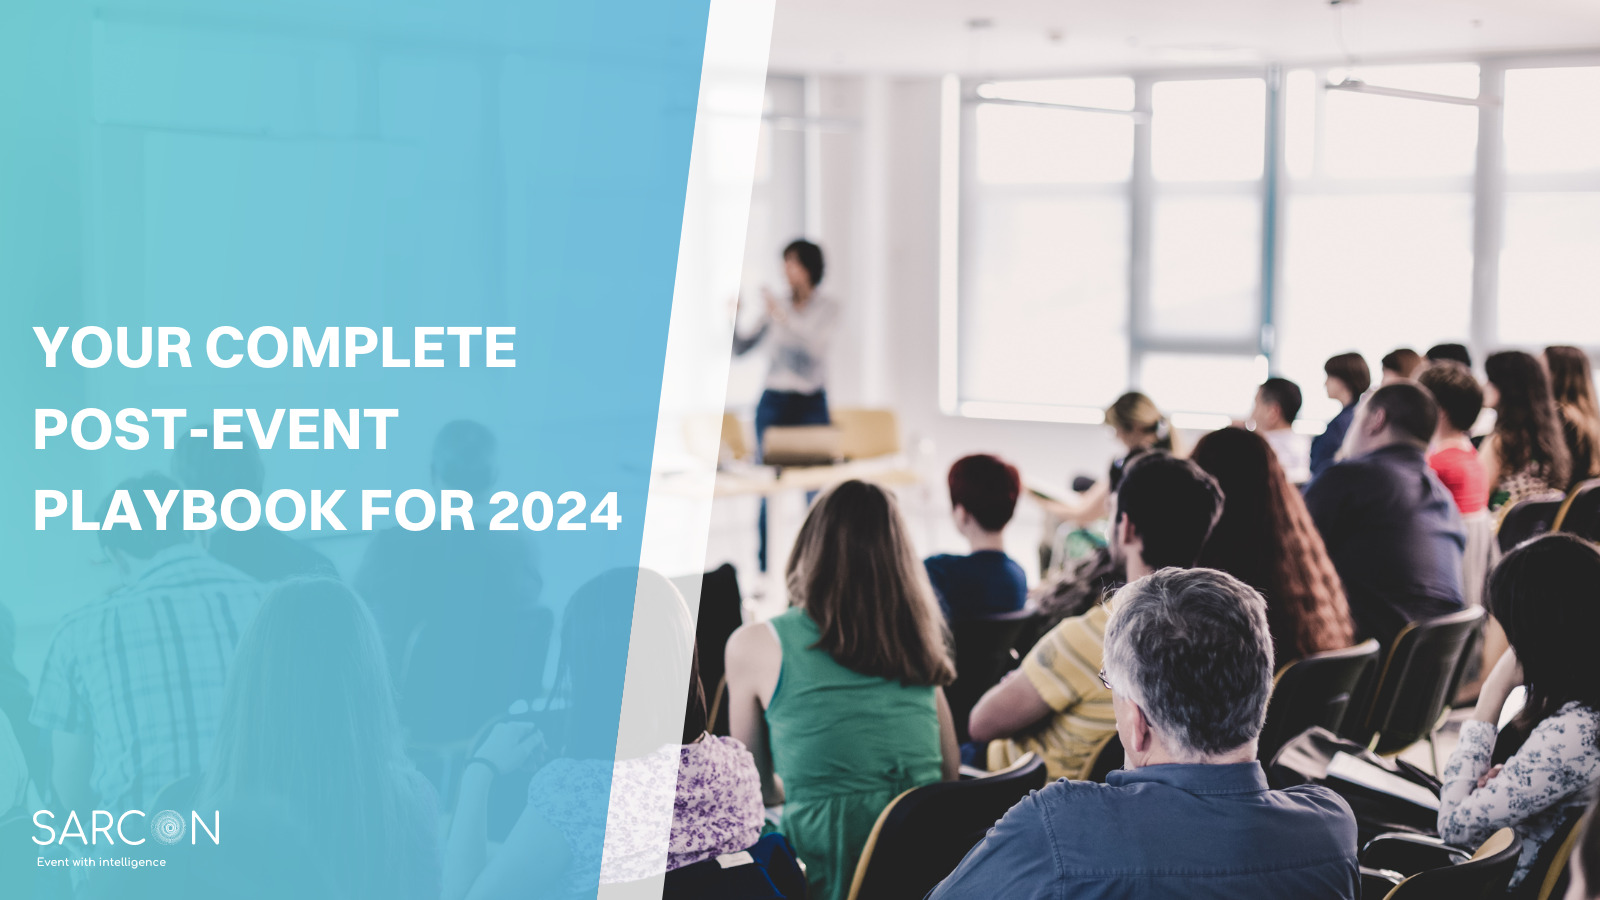 Your Complete Post-Event Playbook for 2024